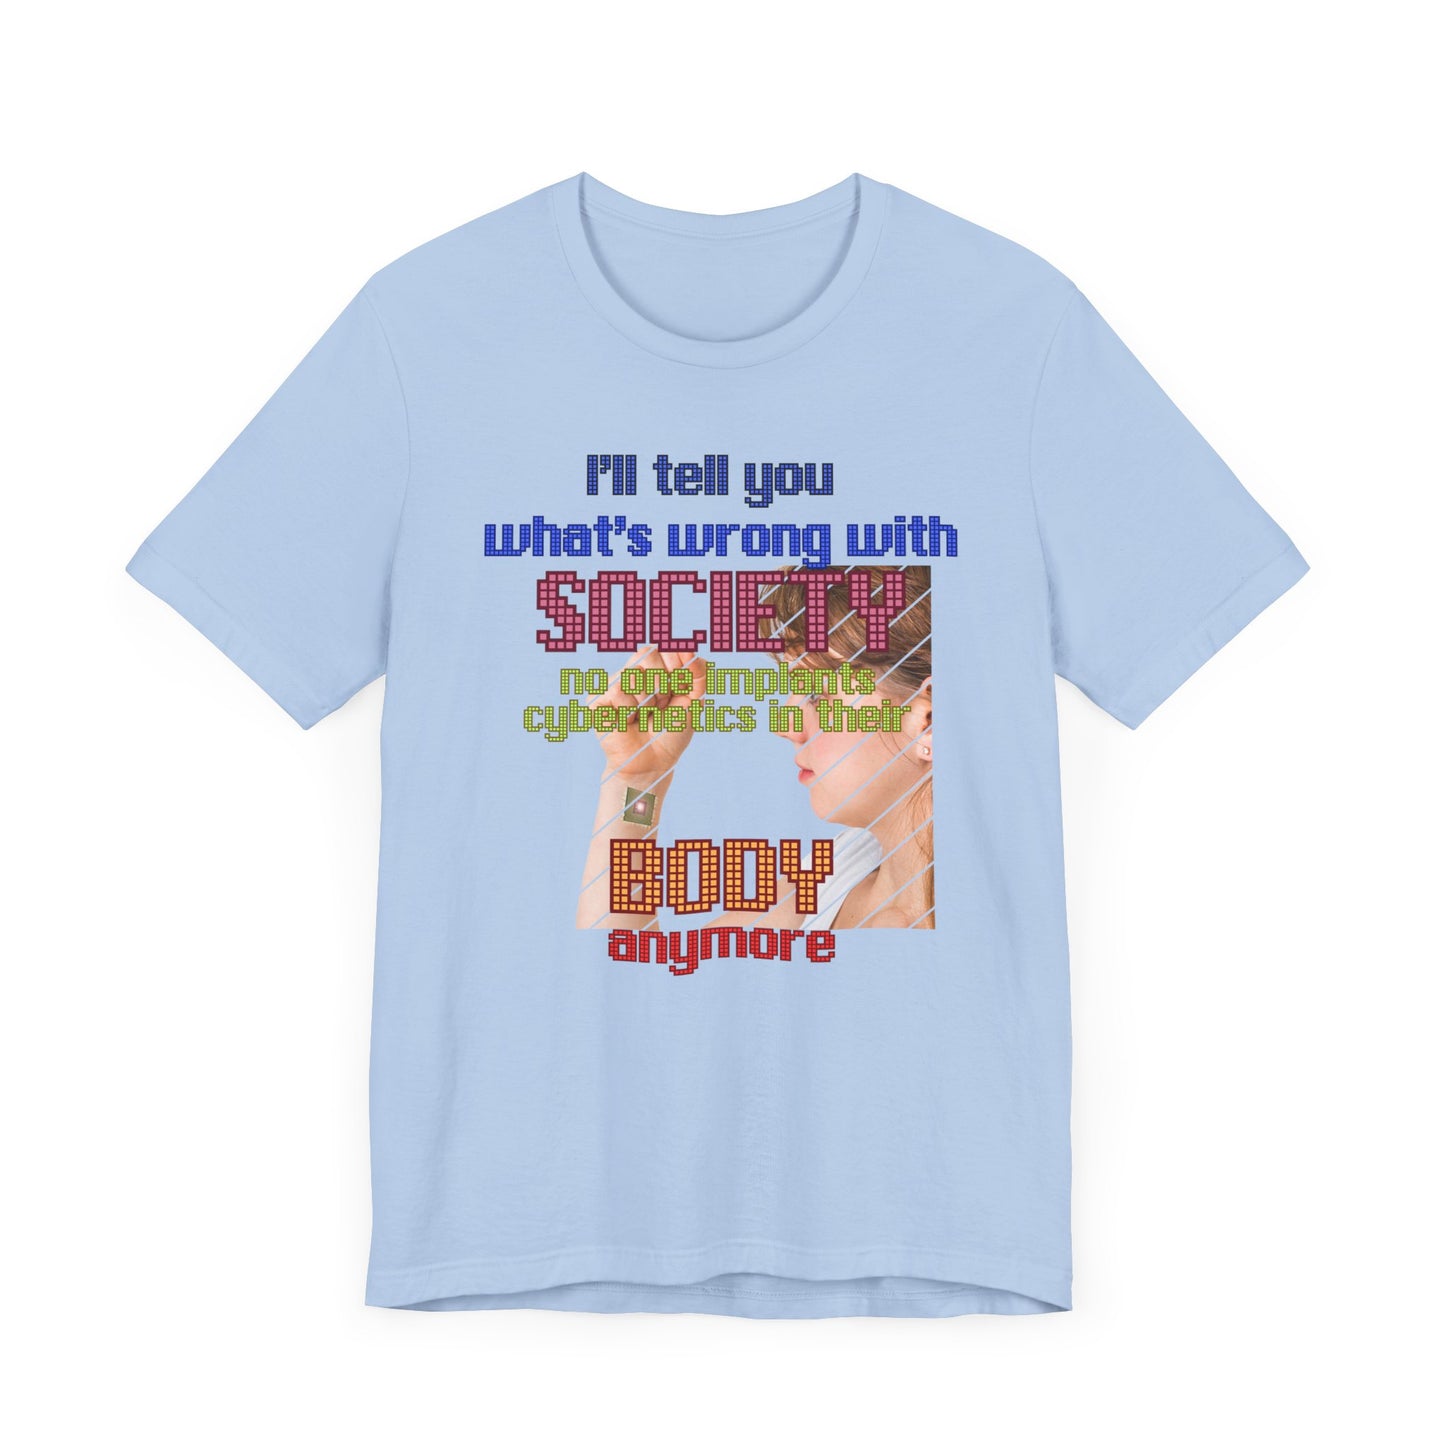 In Their Bodies Anymore Jersey Short Sleeve Tee